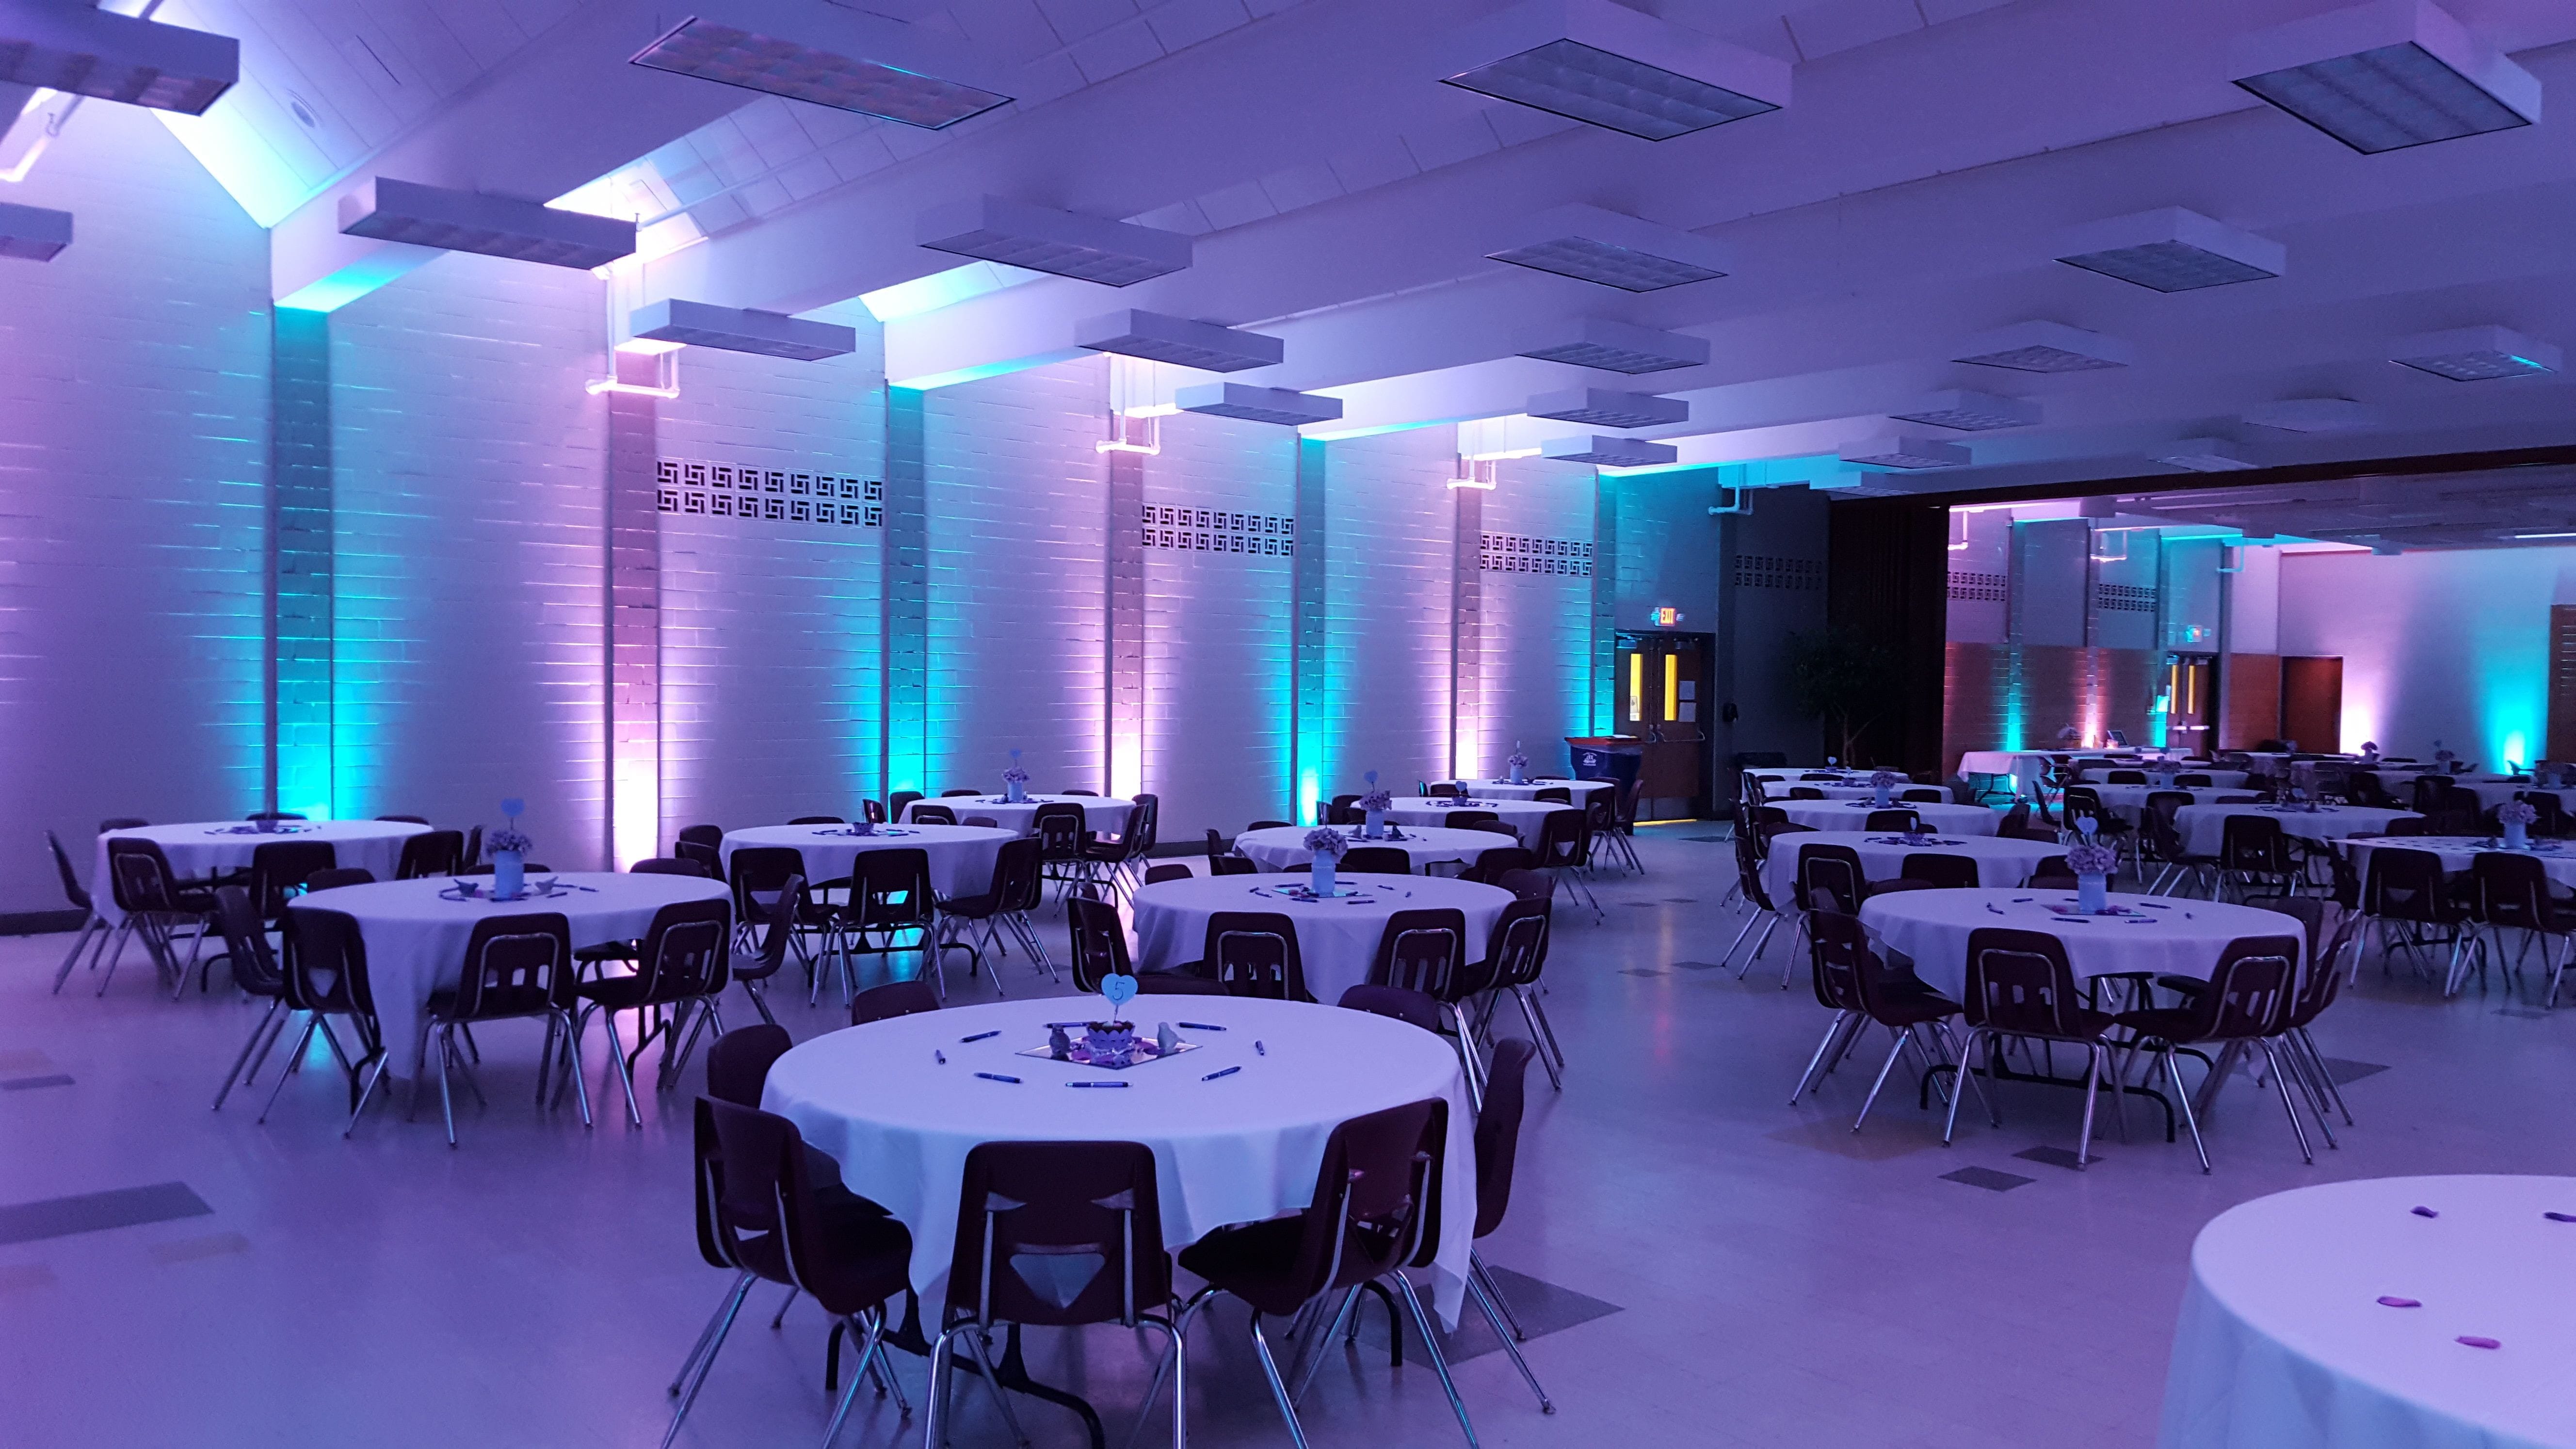 Wedding lighting at Marshall school. Up lighting in teal and lavender